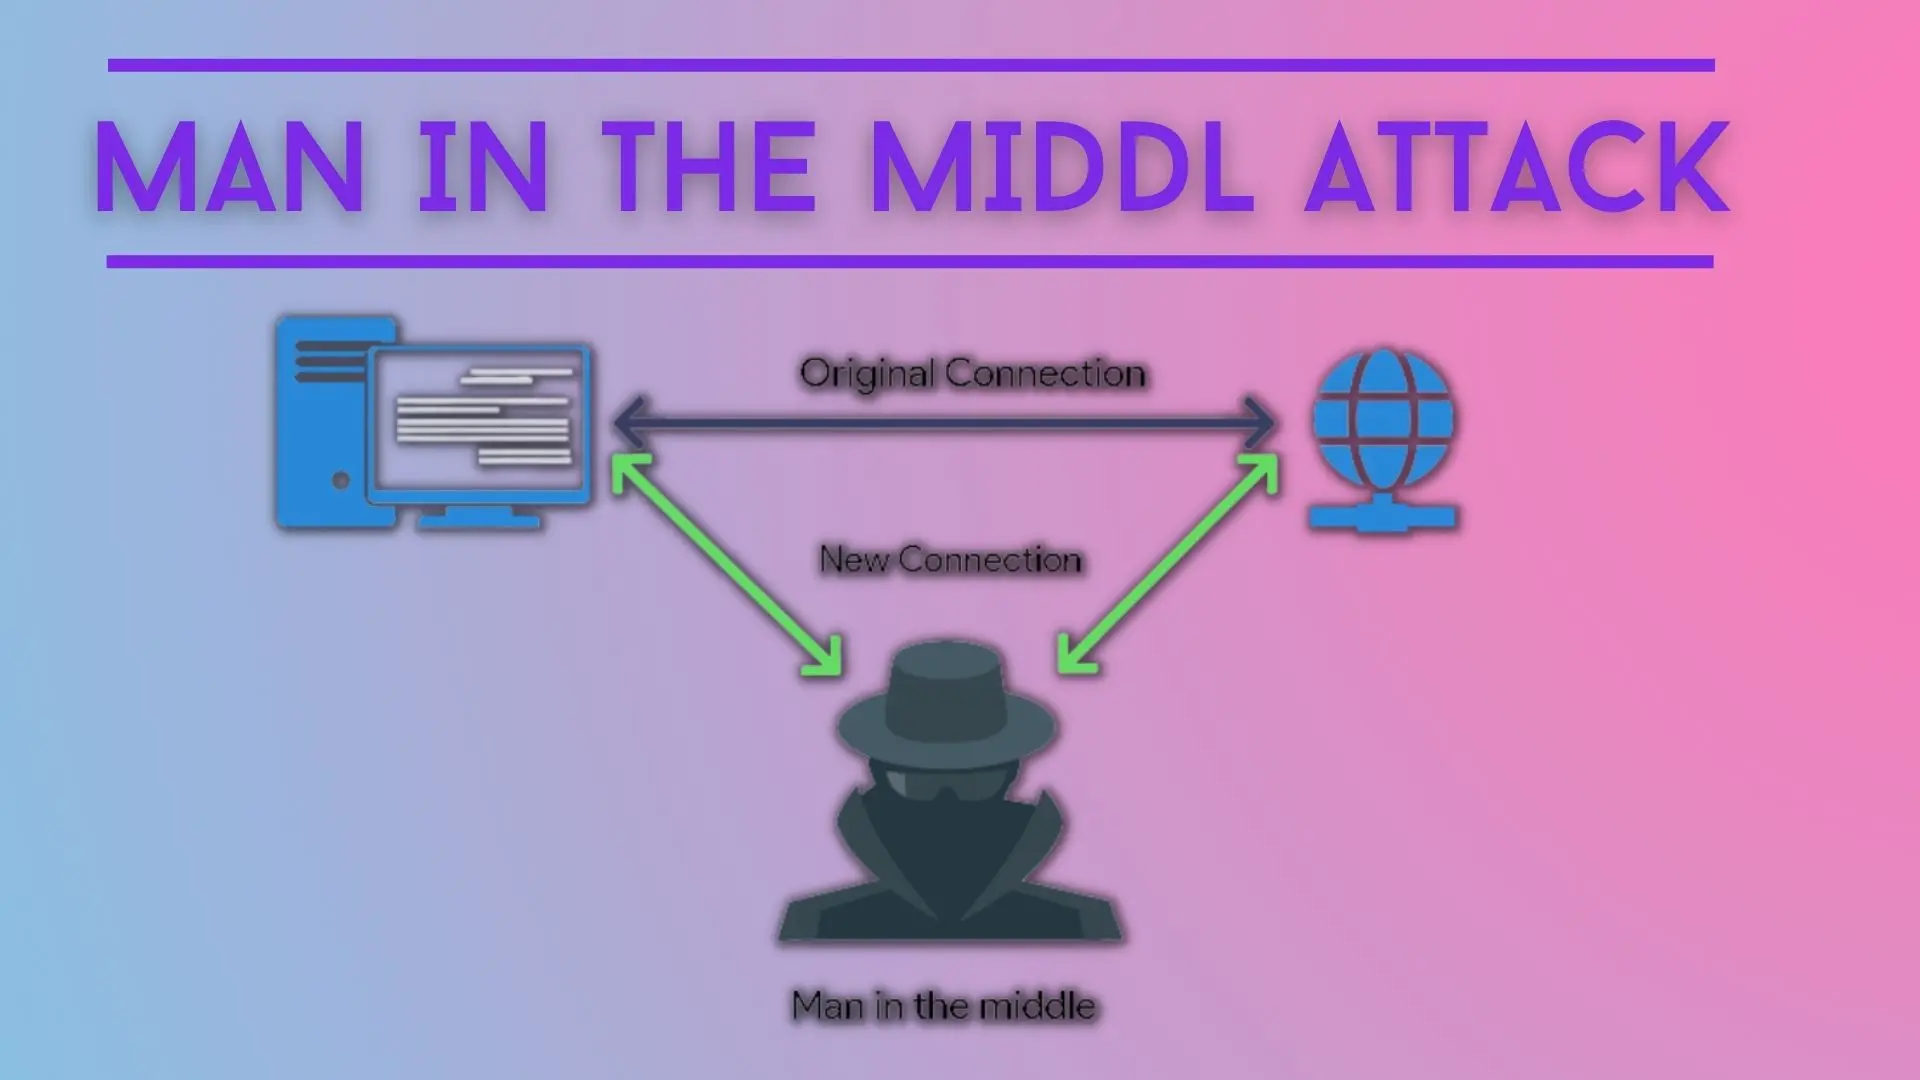 Man in the Middle Attack